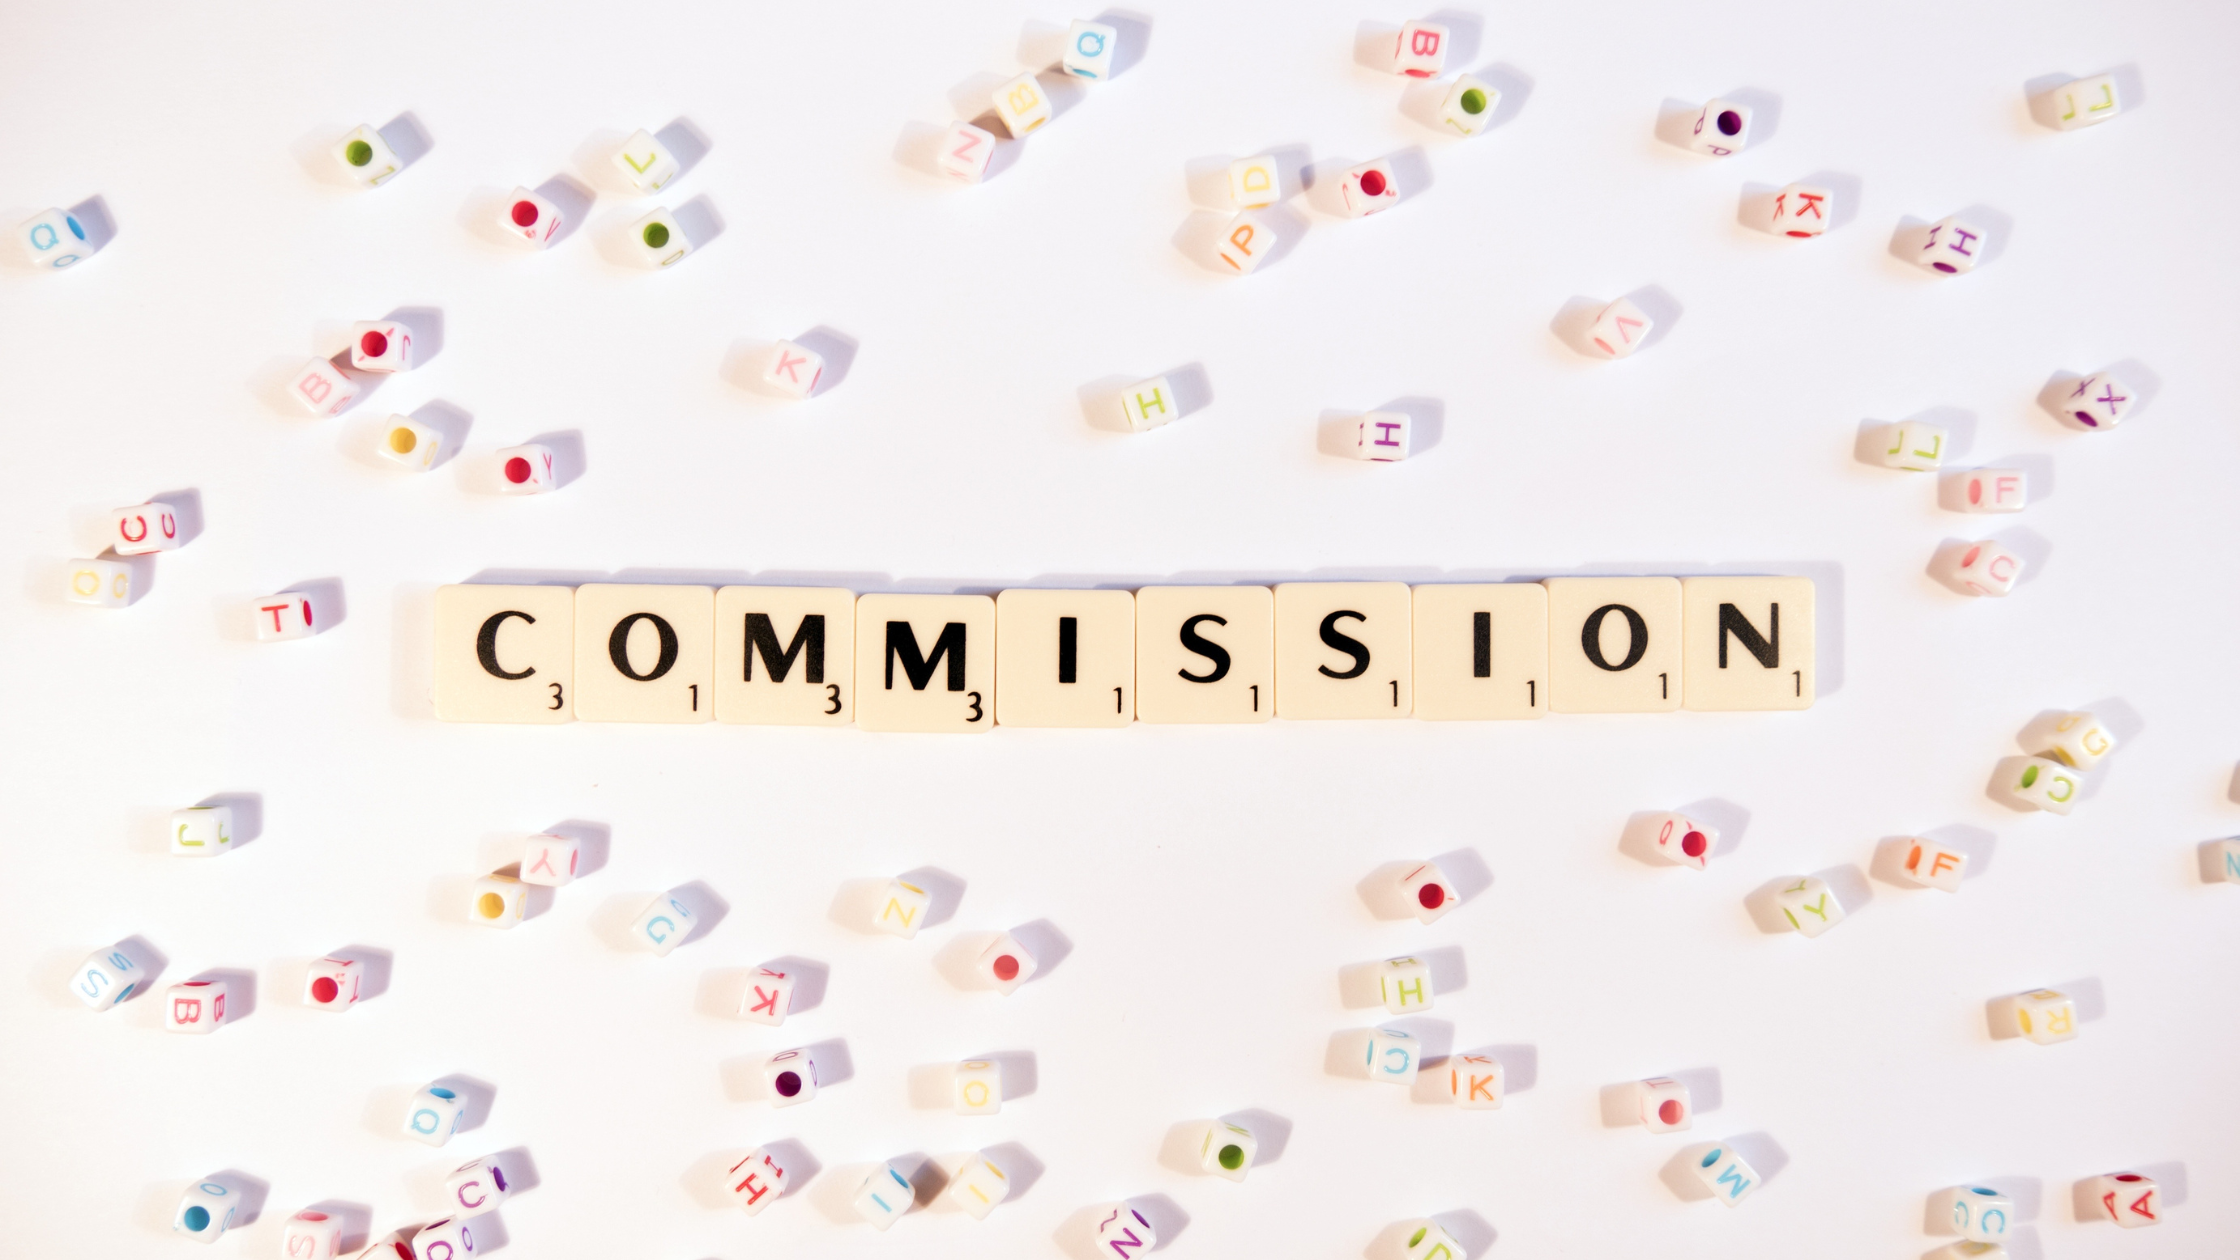 9-earning commisions